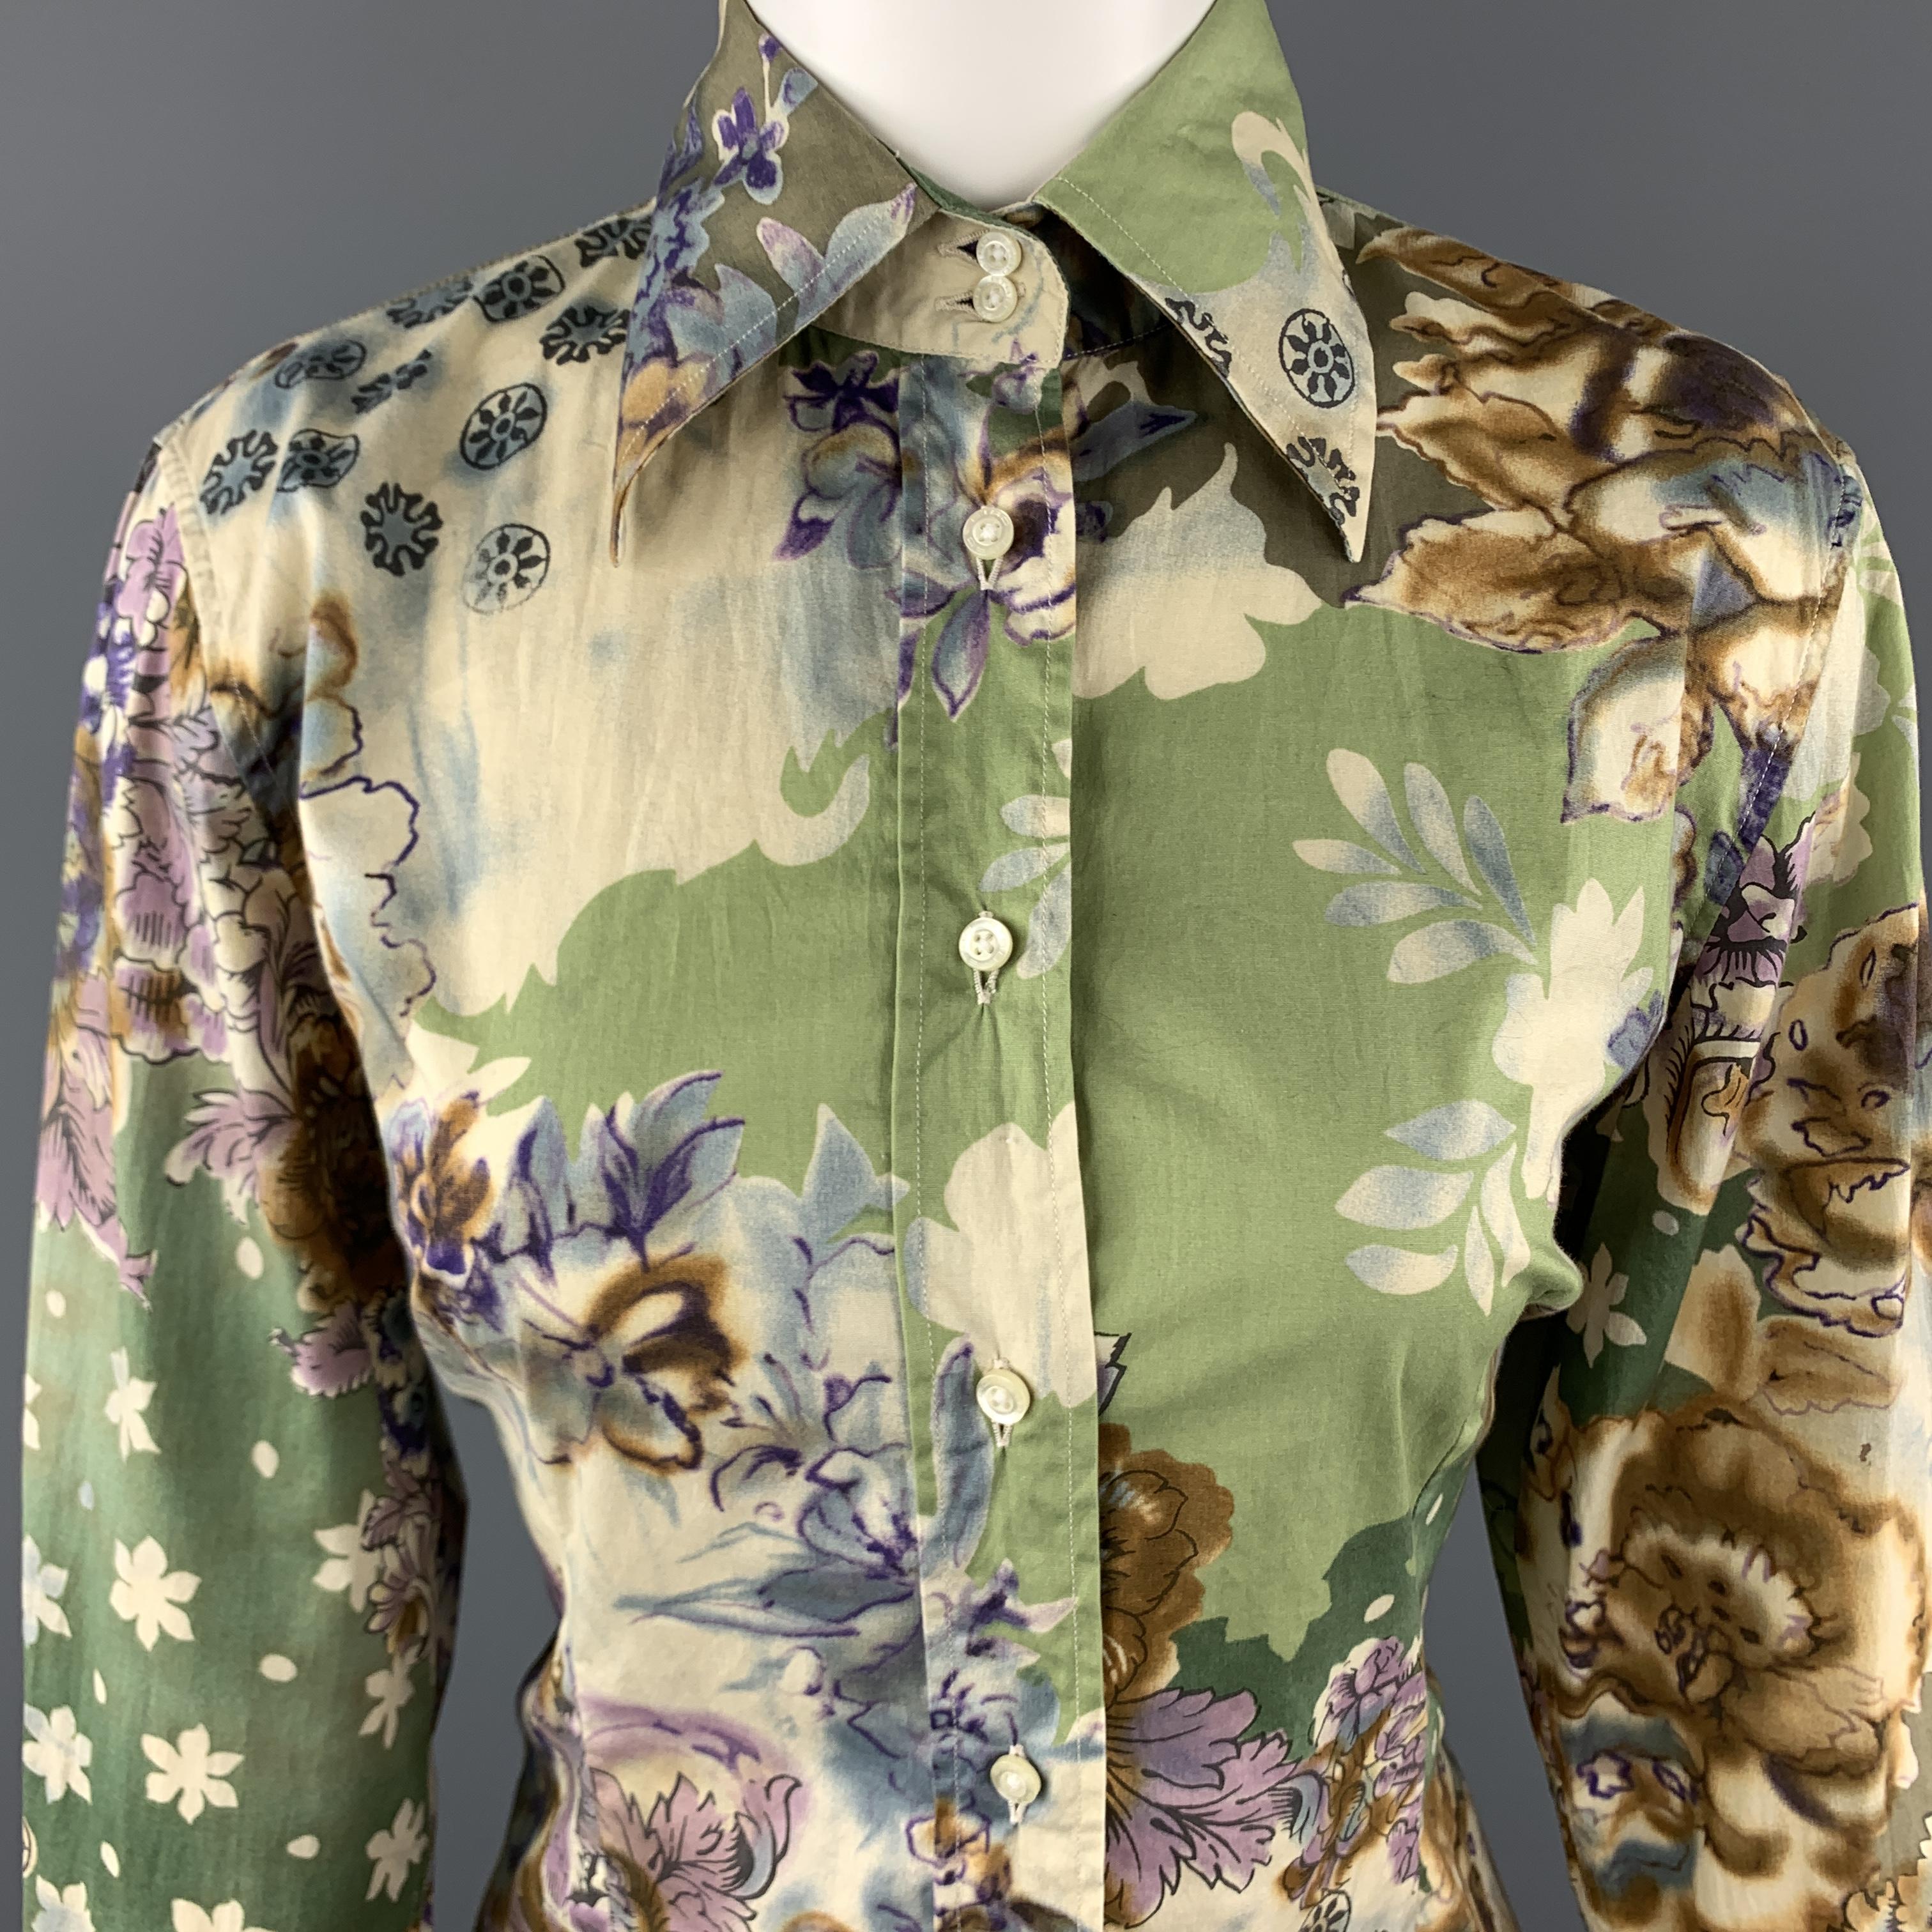 ETRO blouse comes in light abstract green floral print cotton with a pointed collar and button up front. Made in Italy.

Excellent Pre-Owned Condition.
Marked: IT 44

Measurements:

Shoulder: 16 in.
Bust: 40 in.
Sleeve: 24 in.
Length: 25 in.